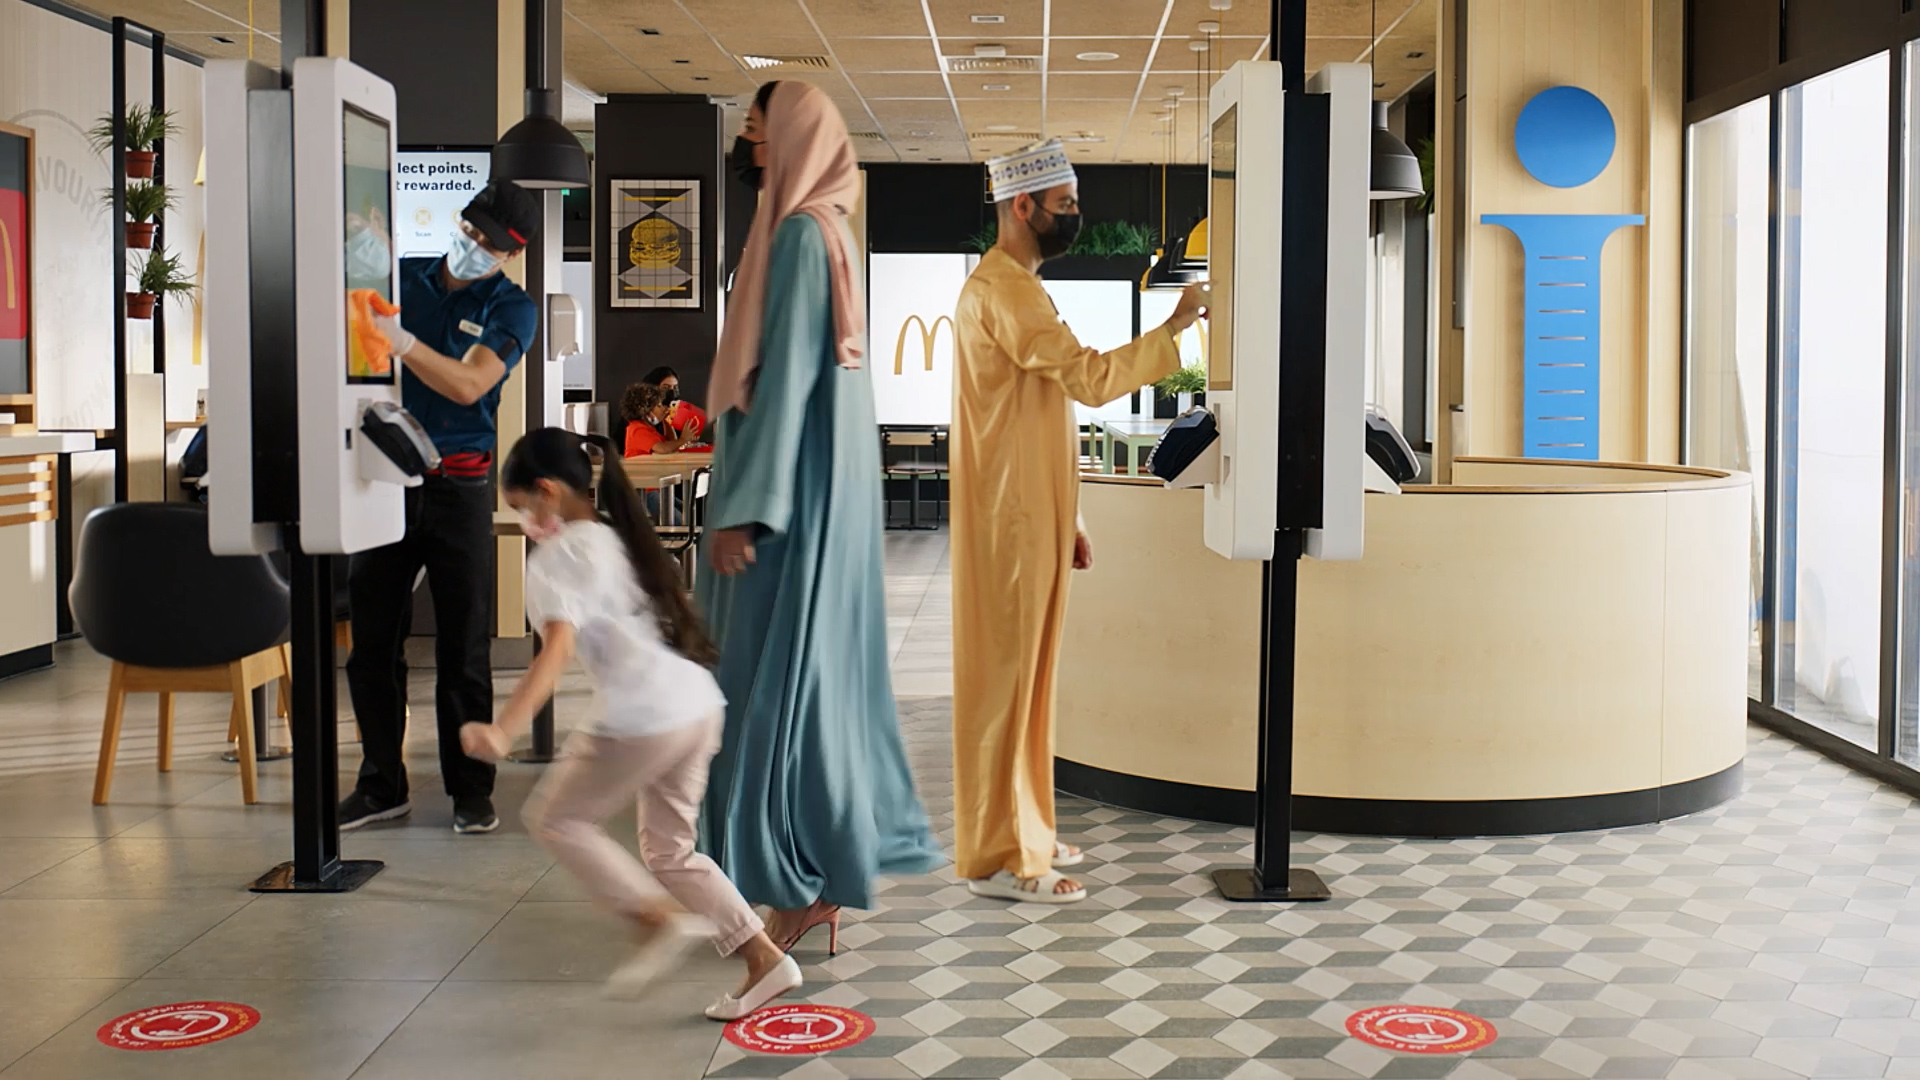 Press Release McDonalds Uses Contextualized DOOH Campaign Powered by Elan Media and Quividi